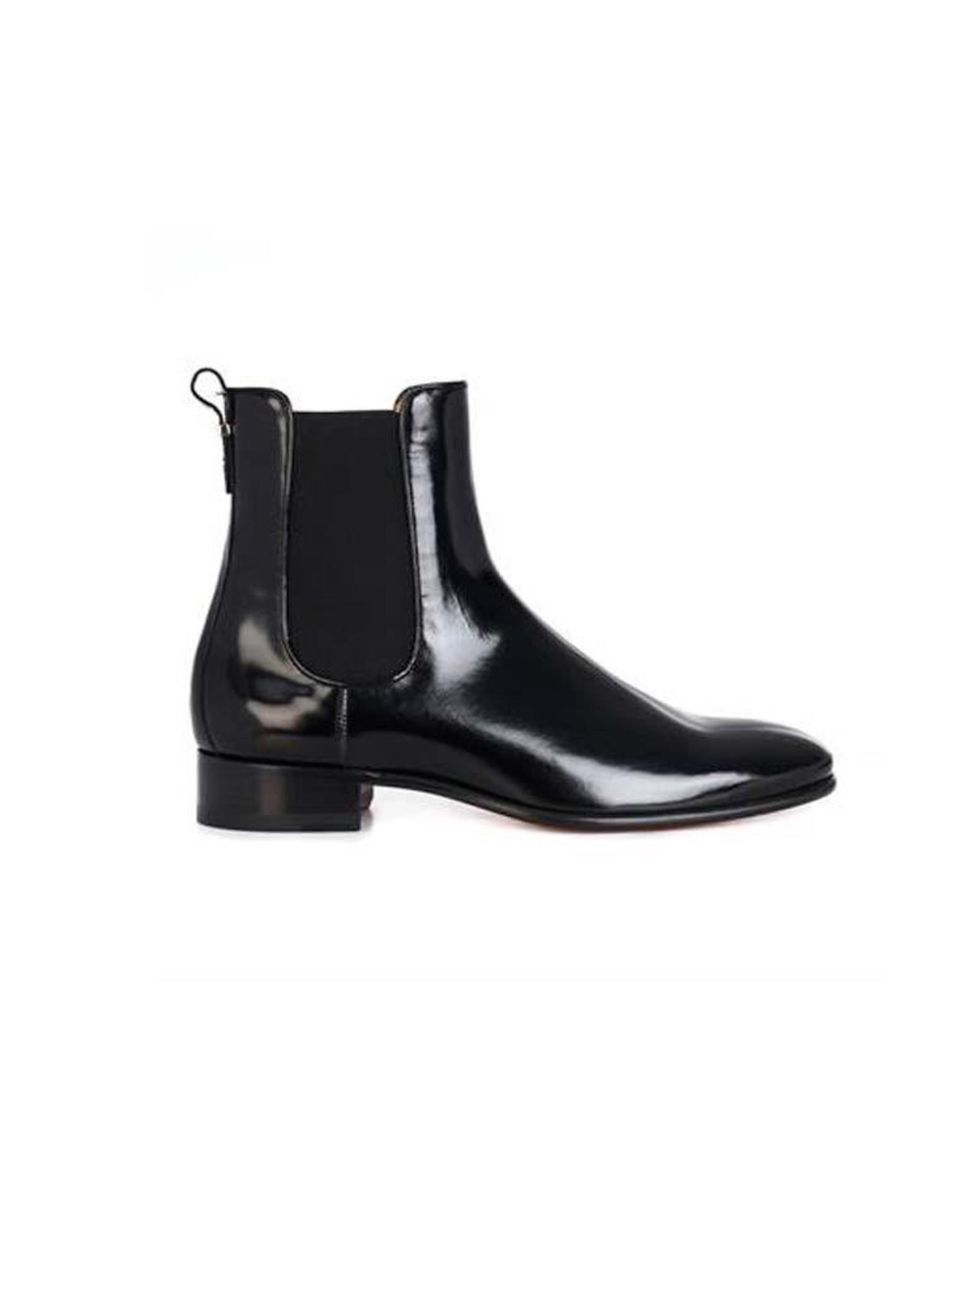 <p>Black ankle boots, <a href="http://www.matchesfashion.com/product/202507" target="_blank">Salvatore Ferragamo</a> &pound;499</p>